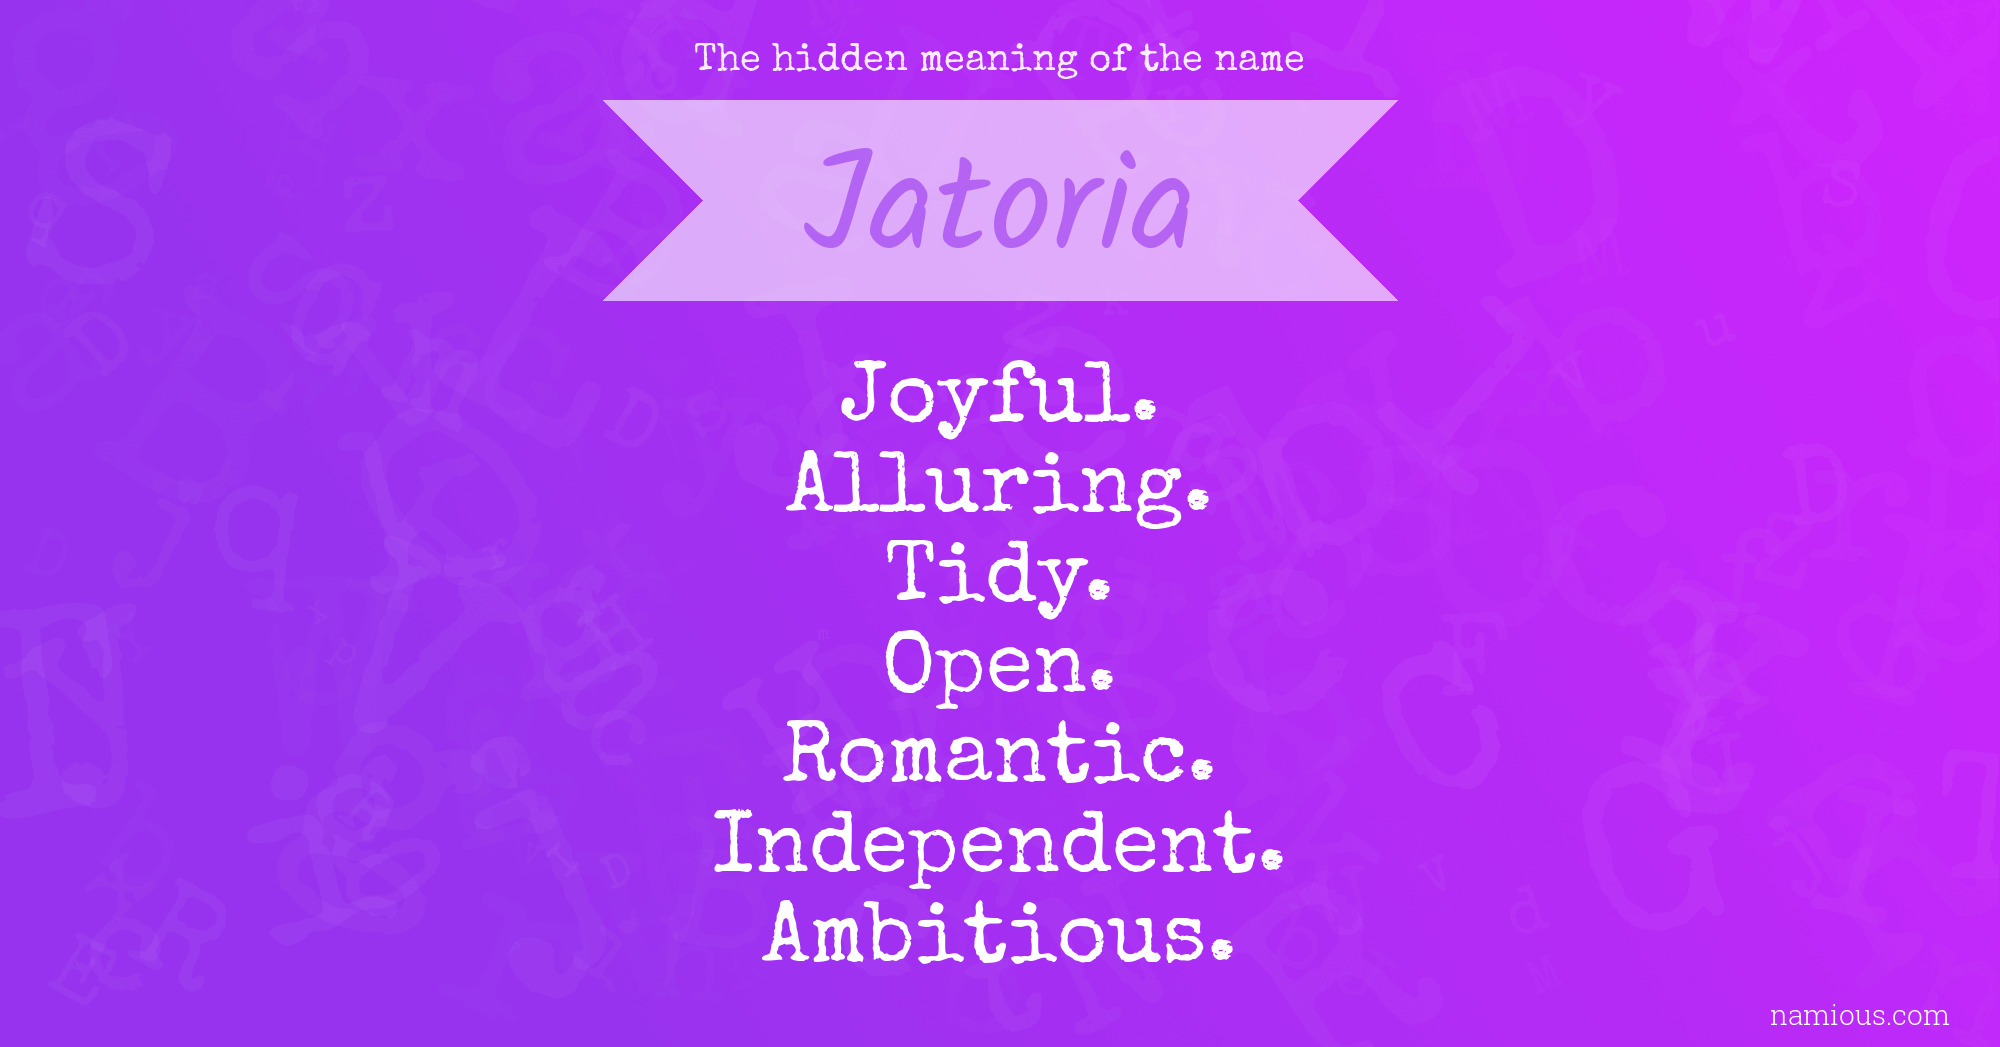 The hidden meaning of the name Jatoria